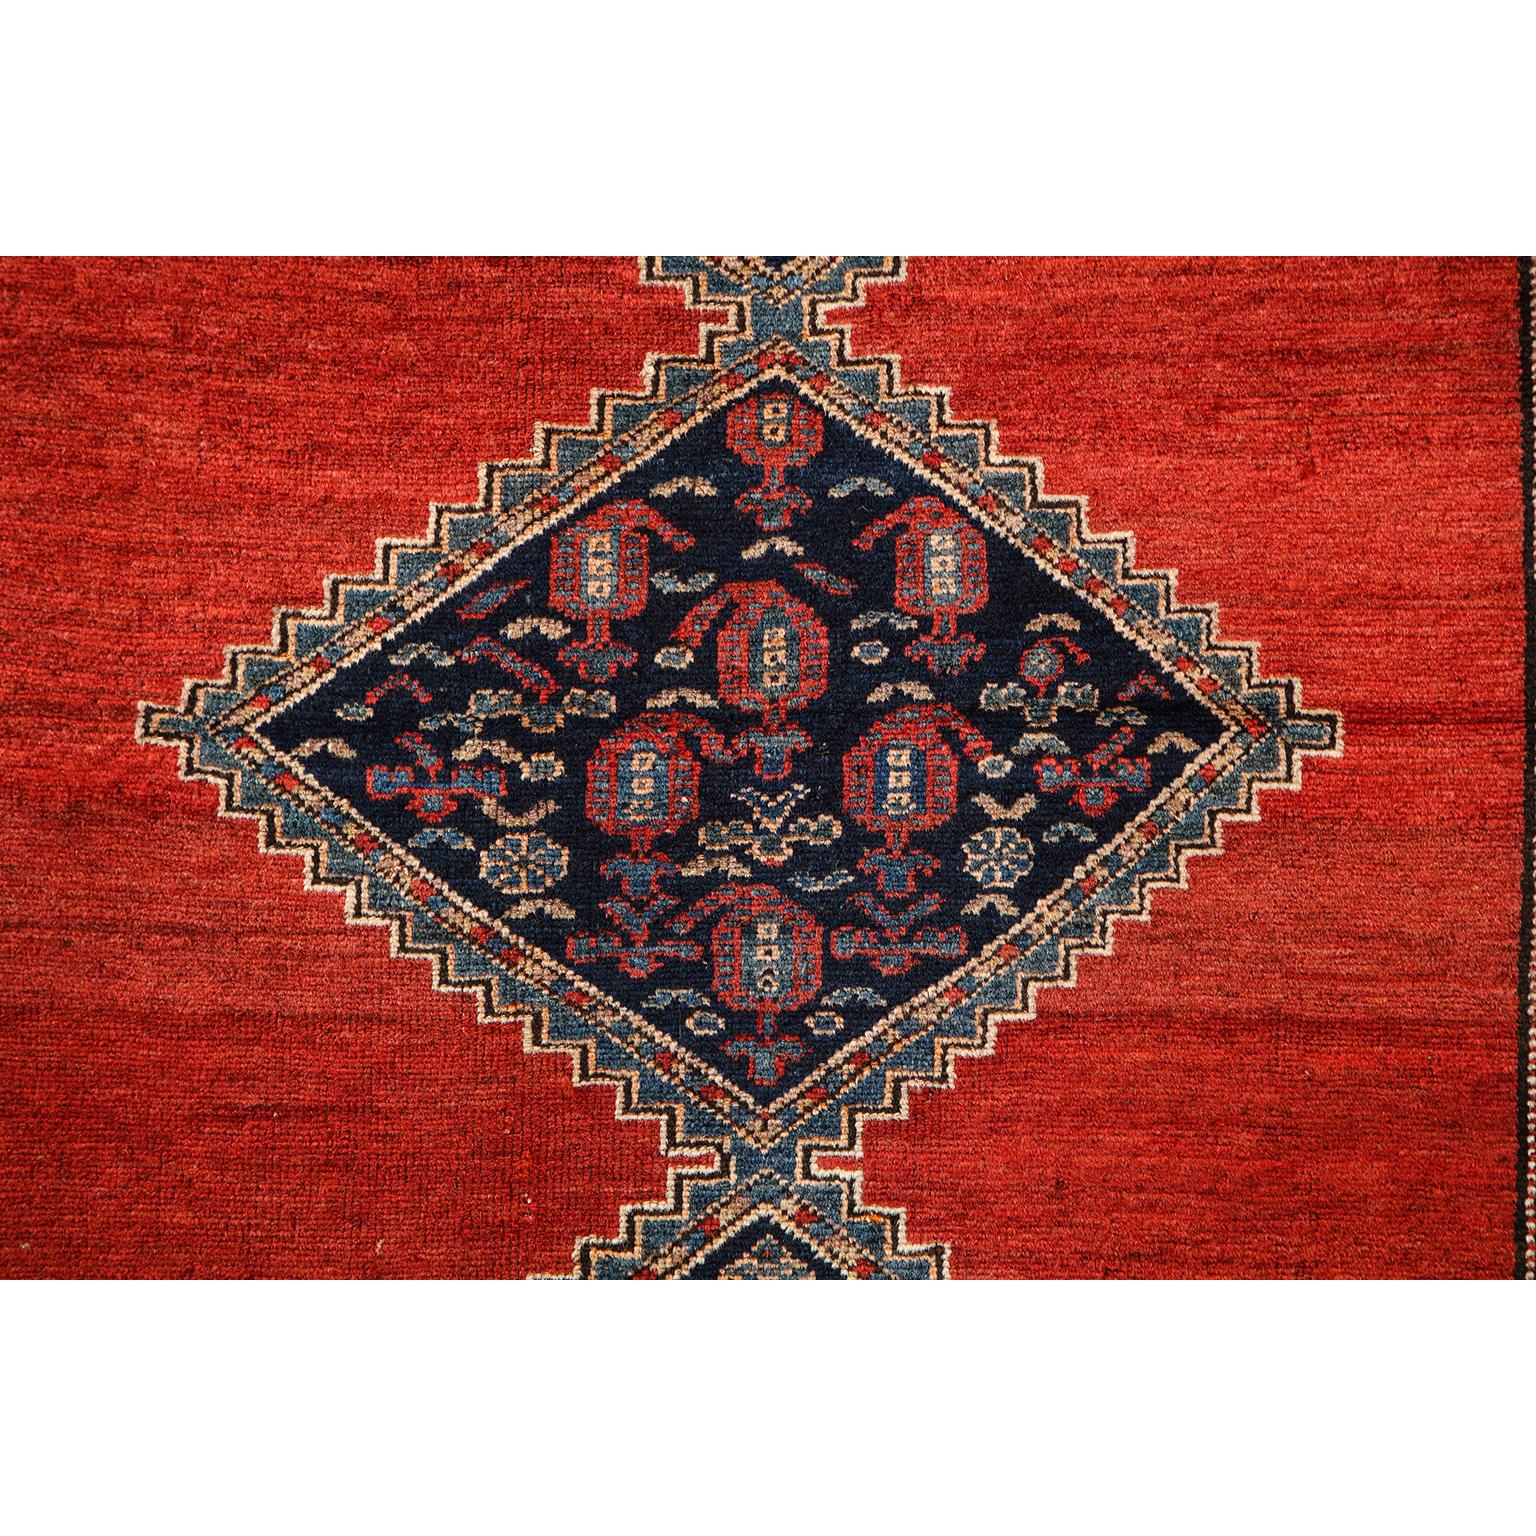 Vegetable Dyed Antique 1900s Persian Malayer Rug, 4' x 6' For Sale